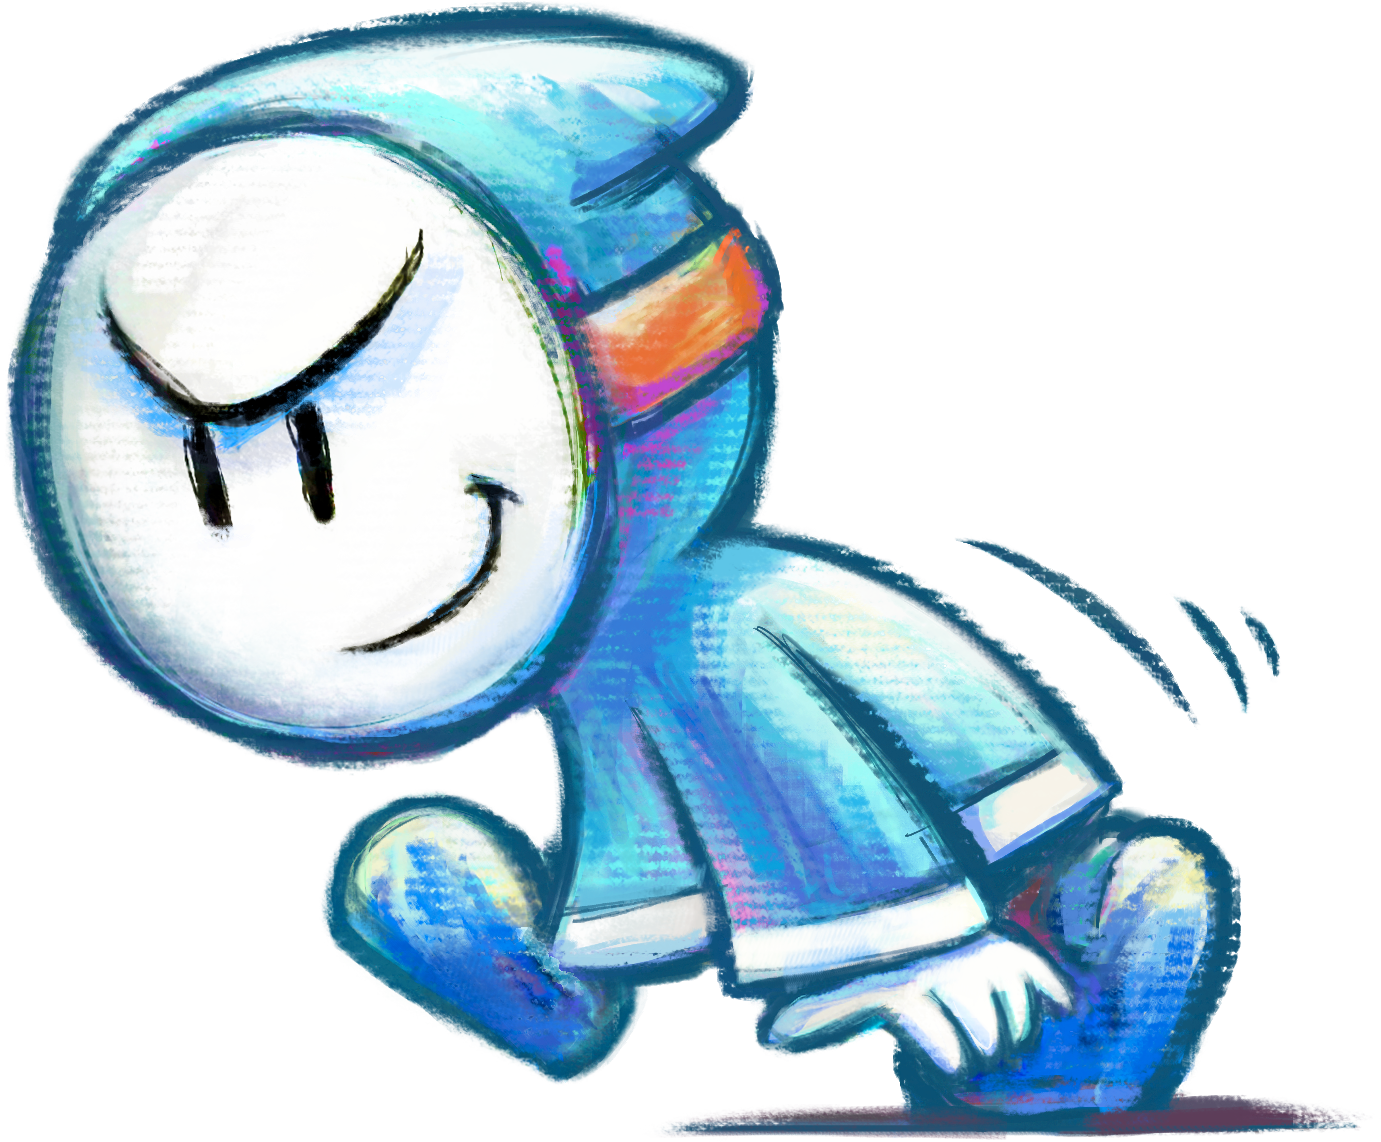 Artwork of a Bandit, from Yoshi's New Island.